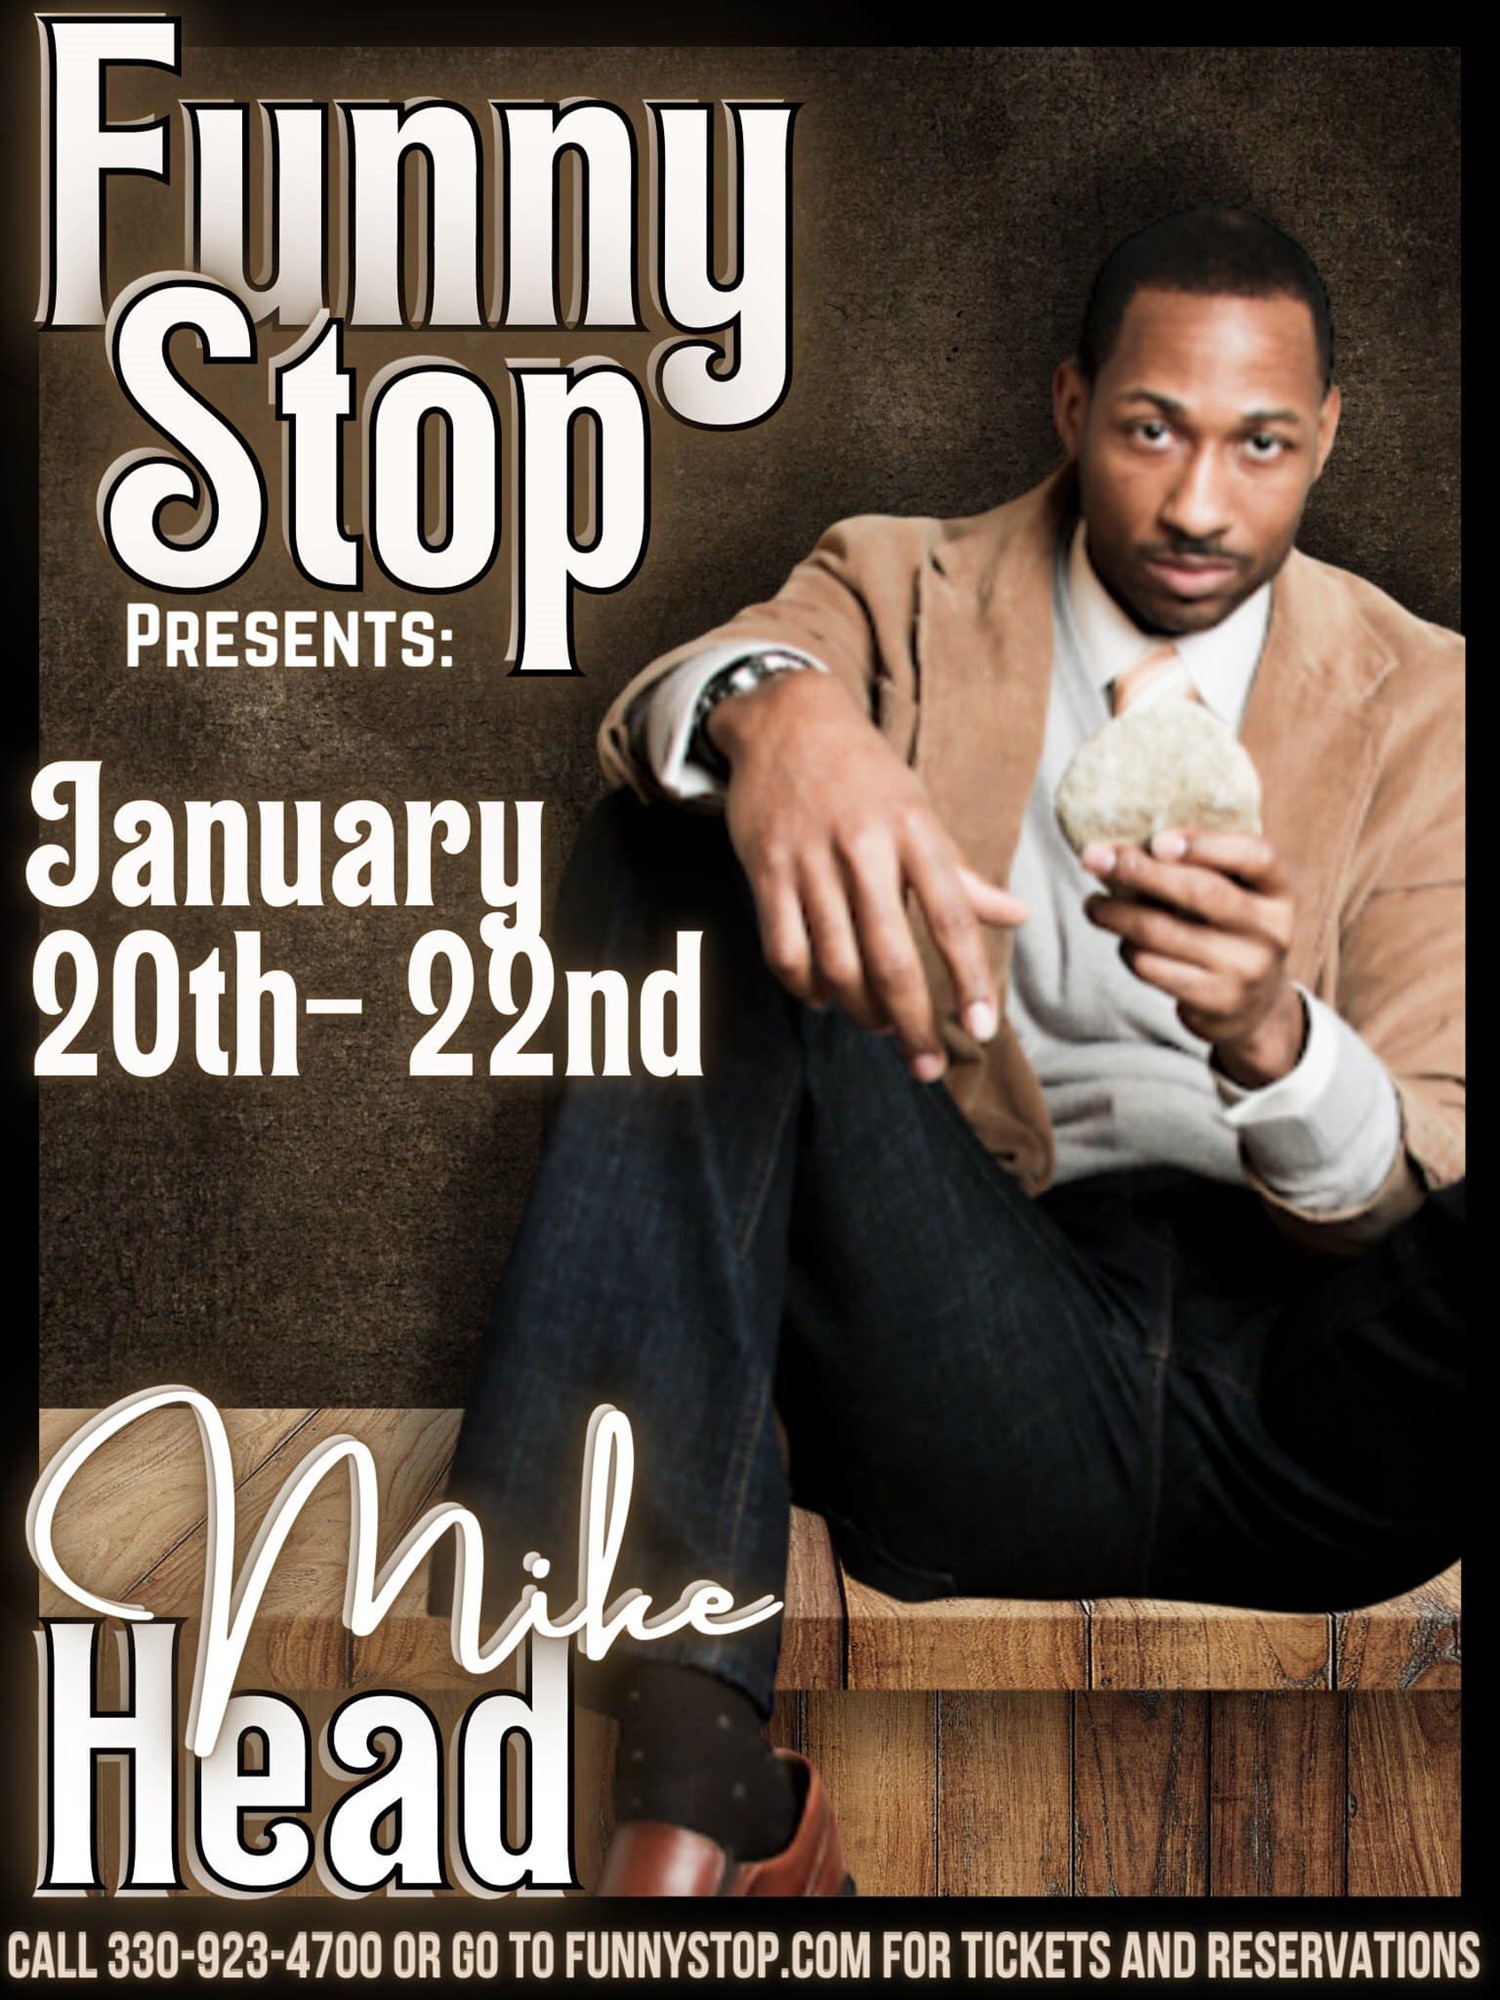 Mike Head Saturday 7:20 Show  on ene. 22, 19:20@Funny Stop Comedy Club - Buy tickets and Get information on Funny Stop funnystop.online